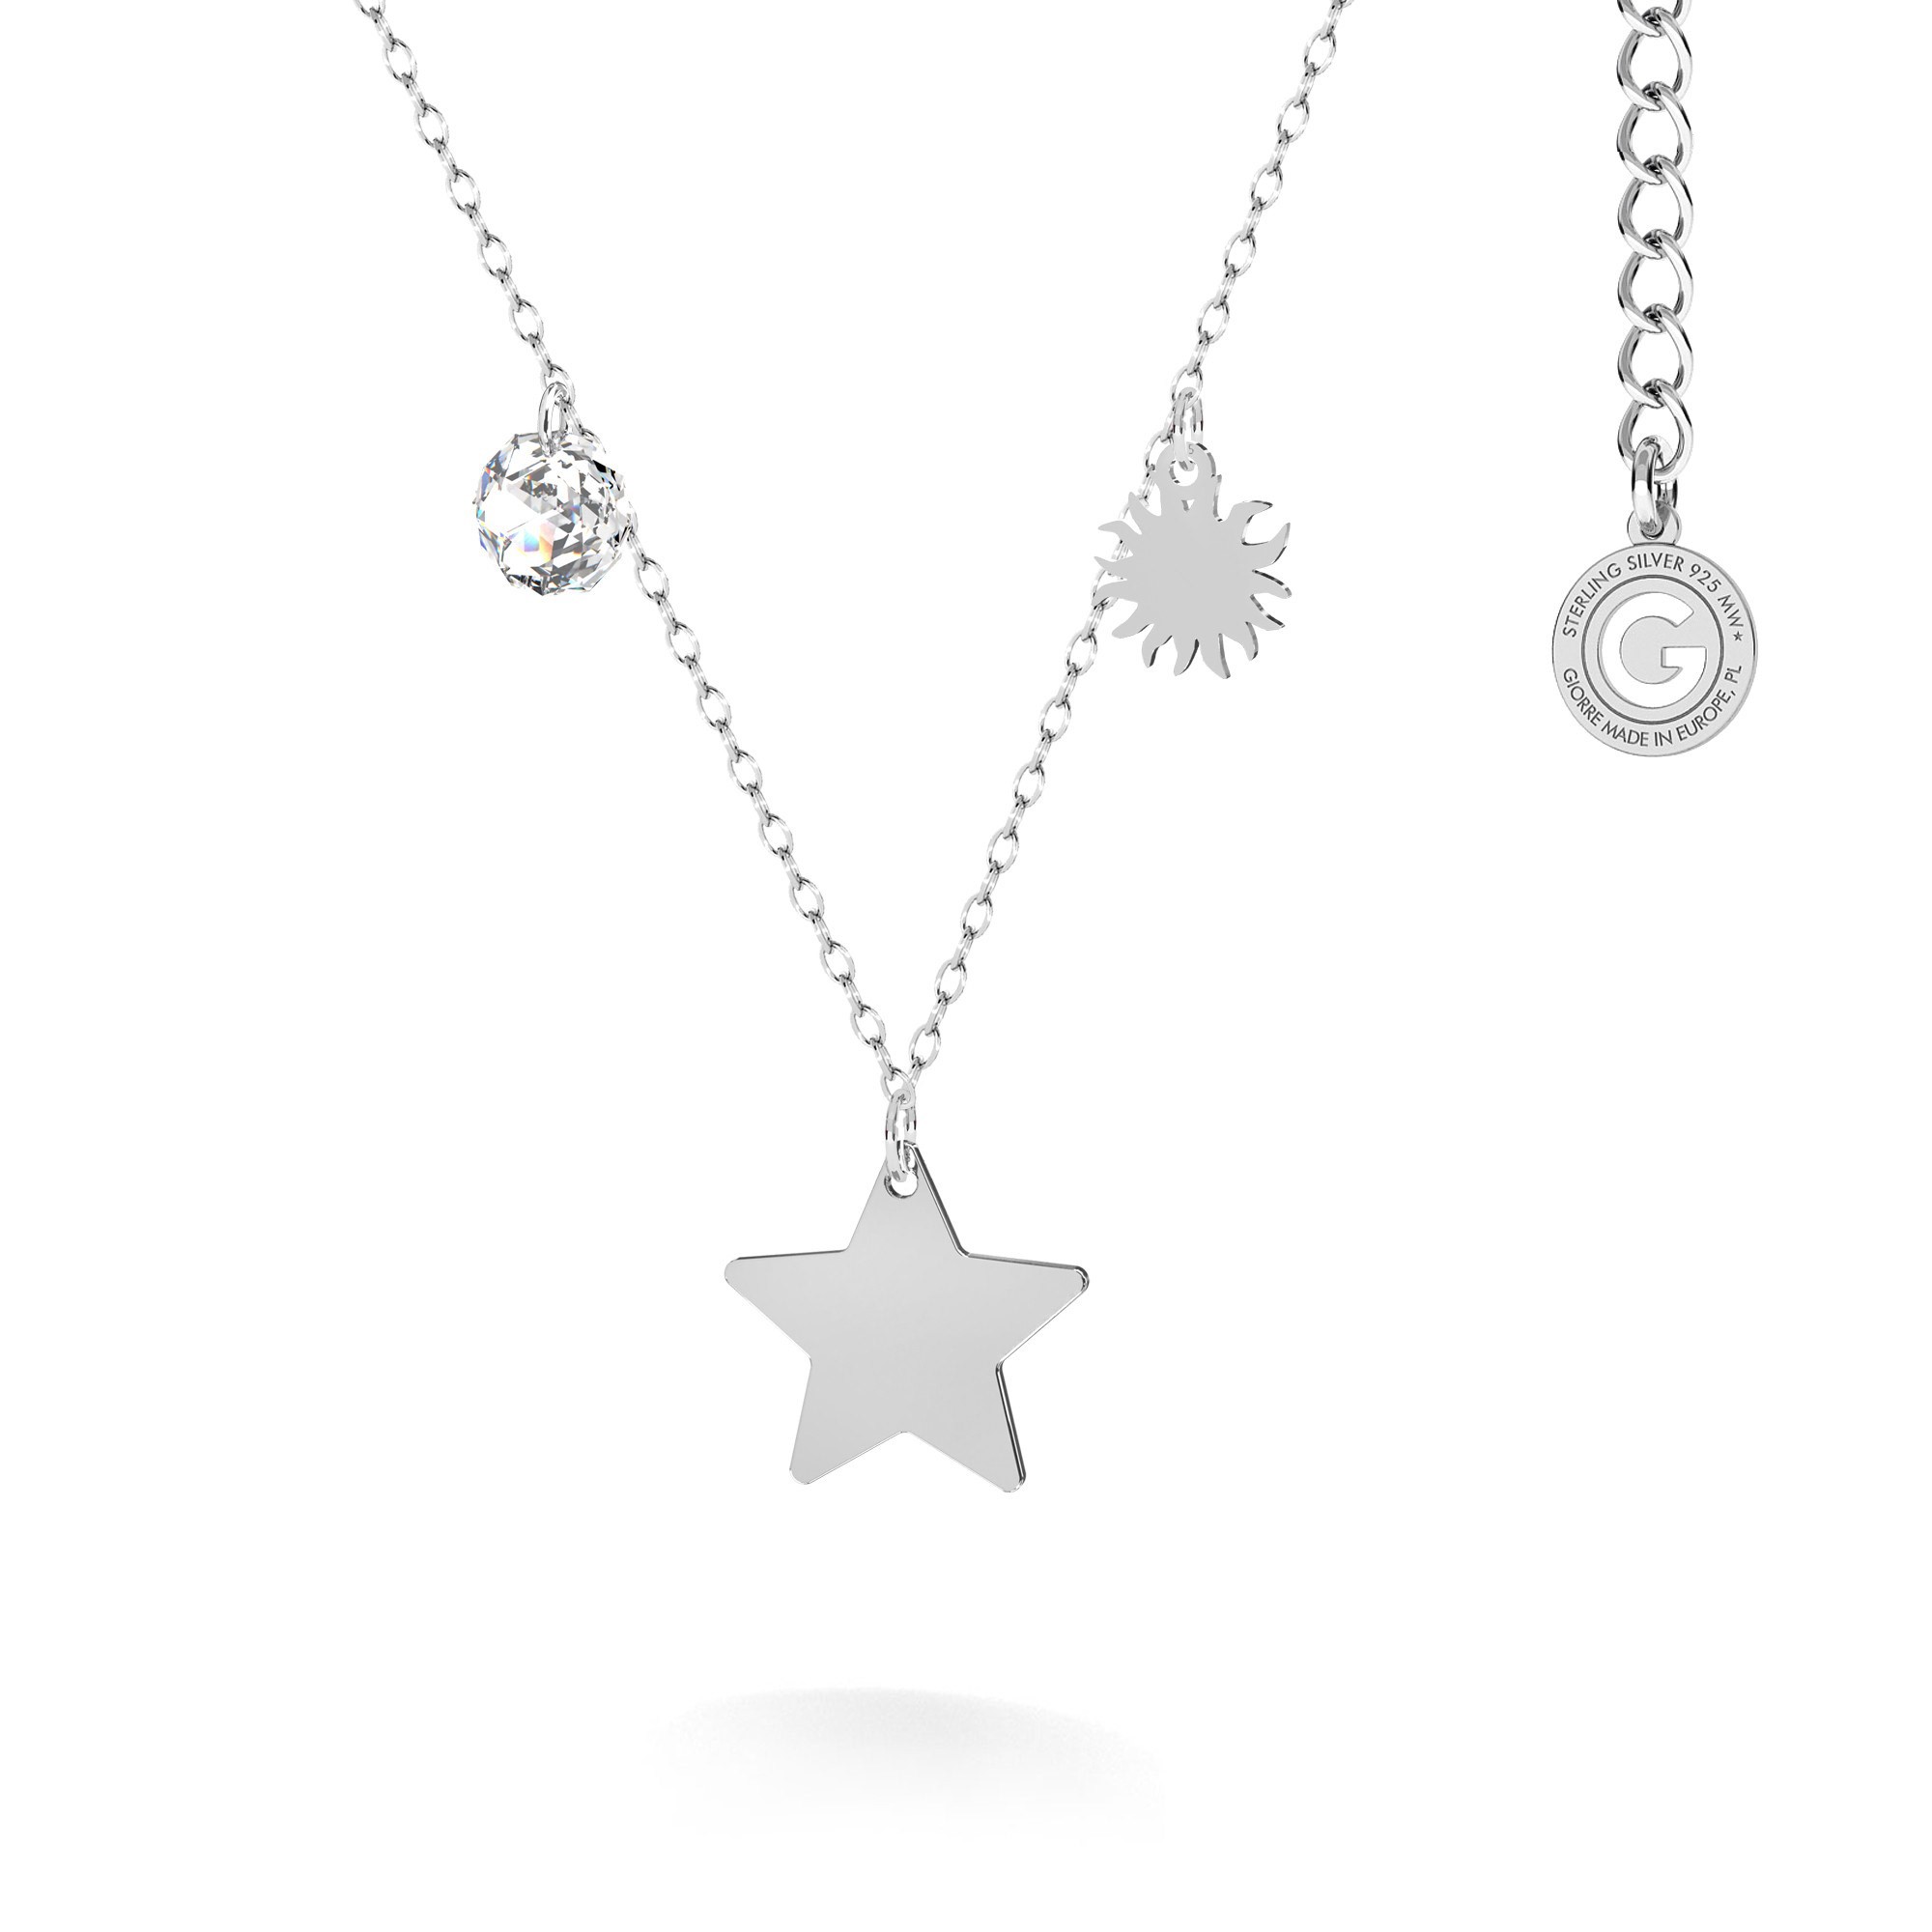 Letter necklace with star pendant, Swarovski crystal, T°ra'vel'' , silver 925